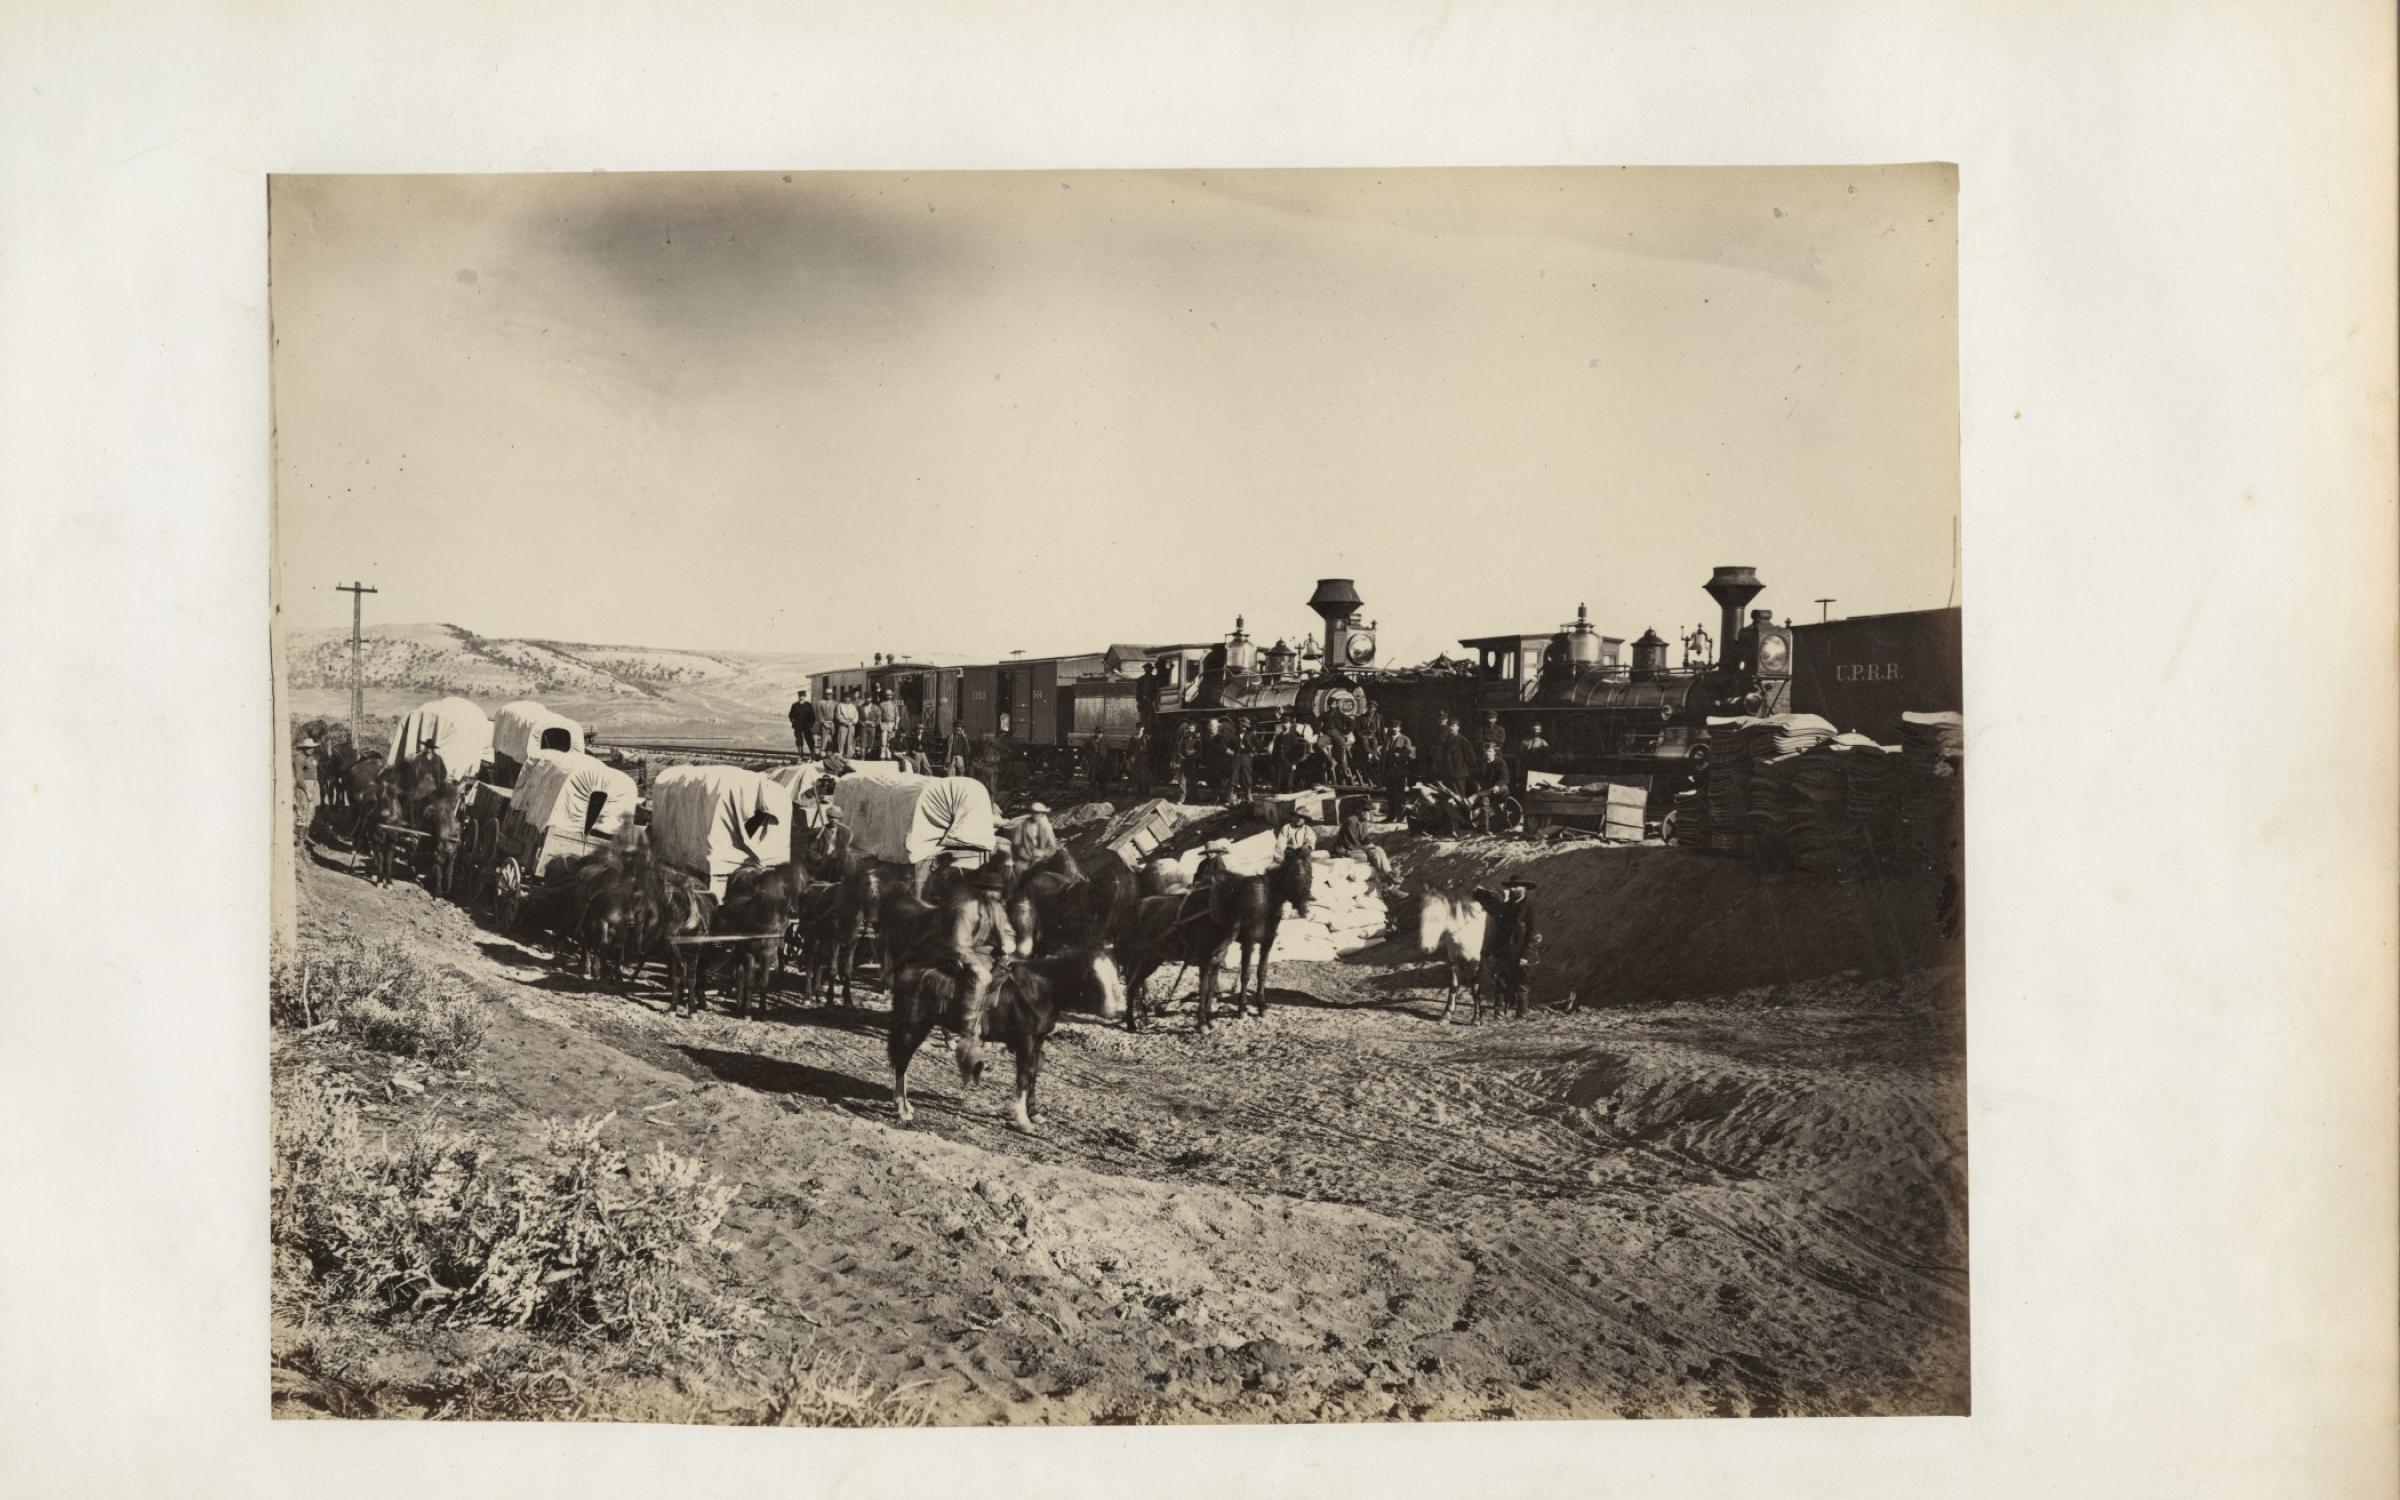 Andrew J. Russell (American, 1829–1902), Supply Trains, 1868, Plate 27, “The Great West Illustrated,” albumen silver print, courtesy Union Pacific Railroad Museum